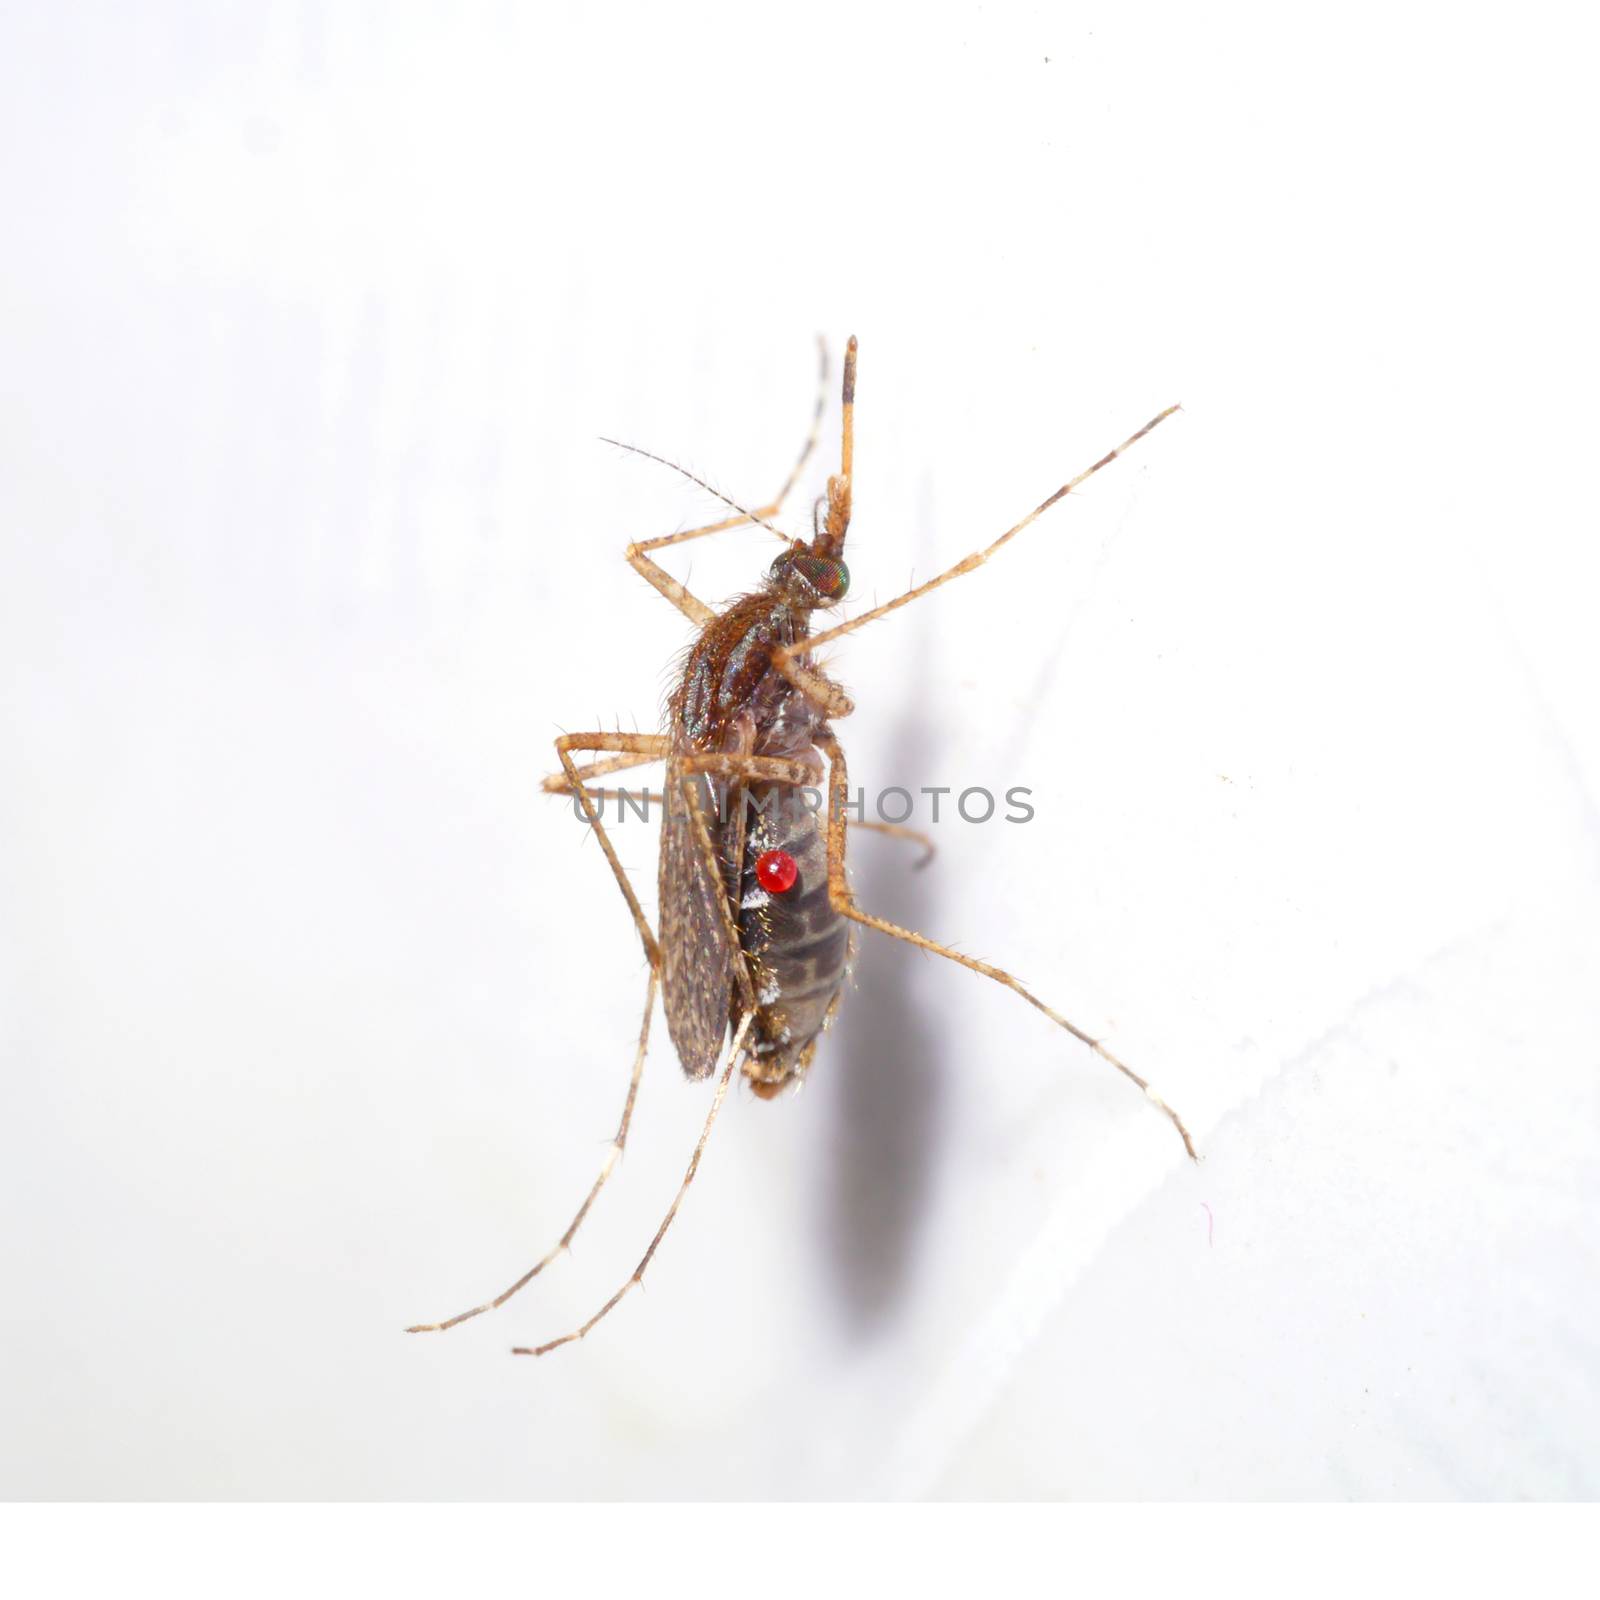 Mosquitoes spawn isolated on white background. by Noppharat_th